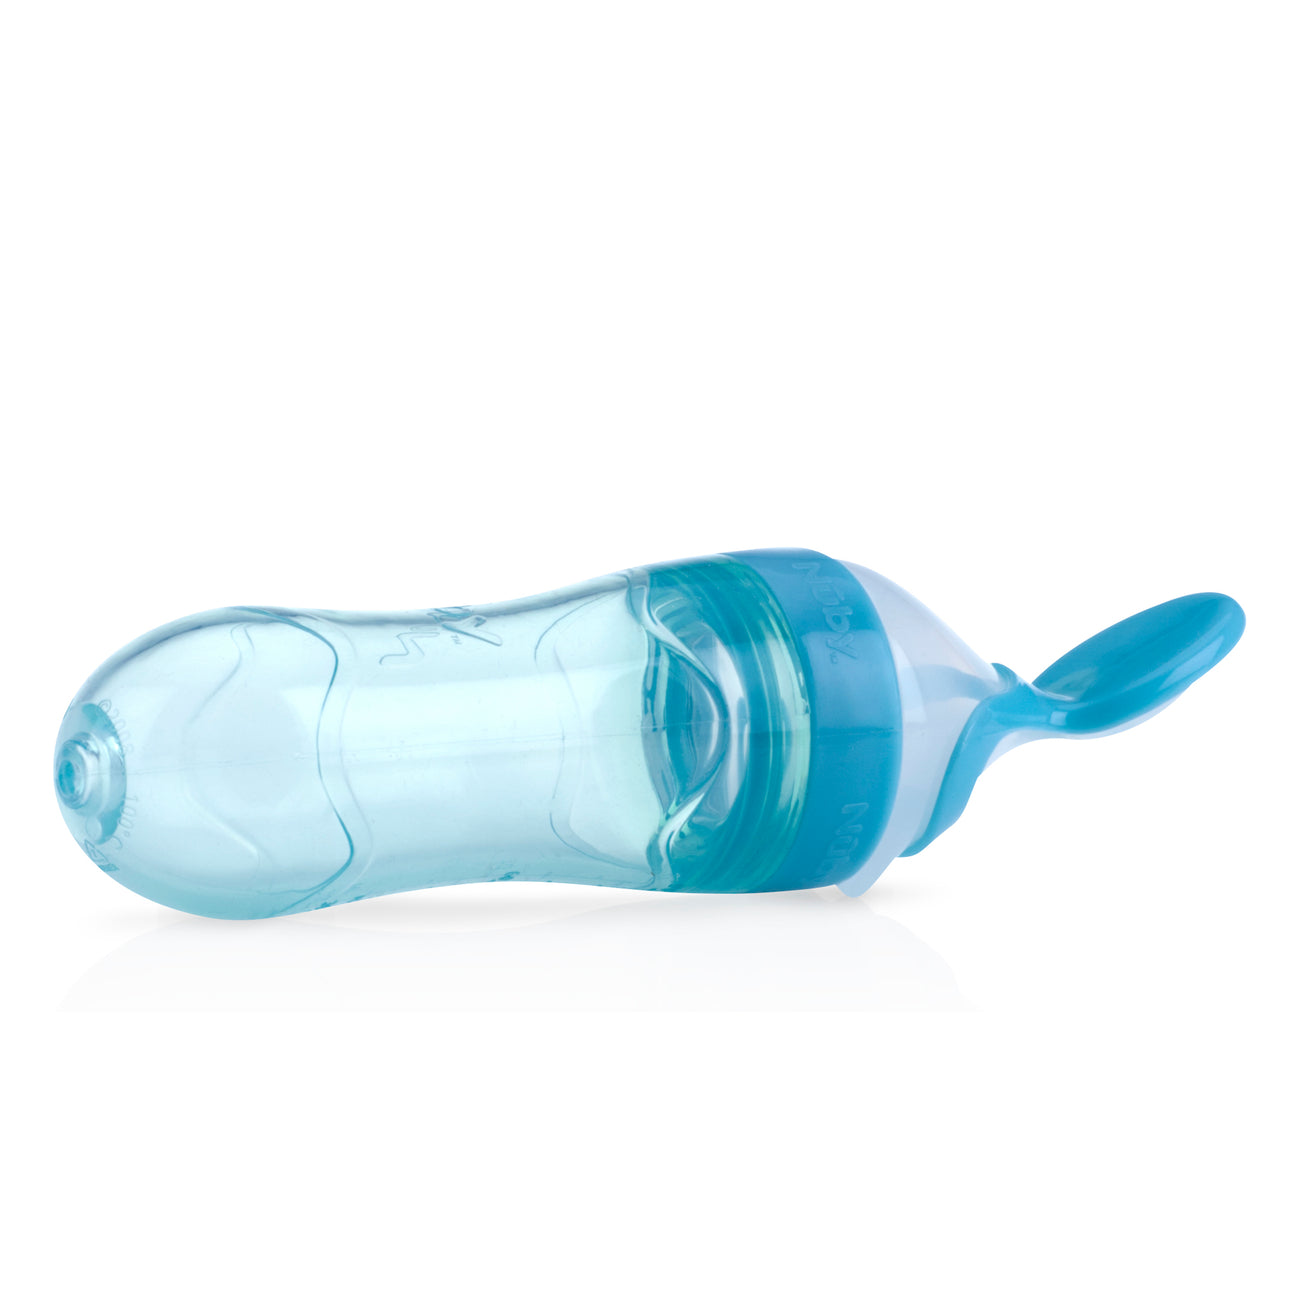 Squeeze Feeder - Nuby US